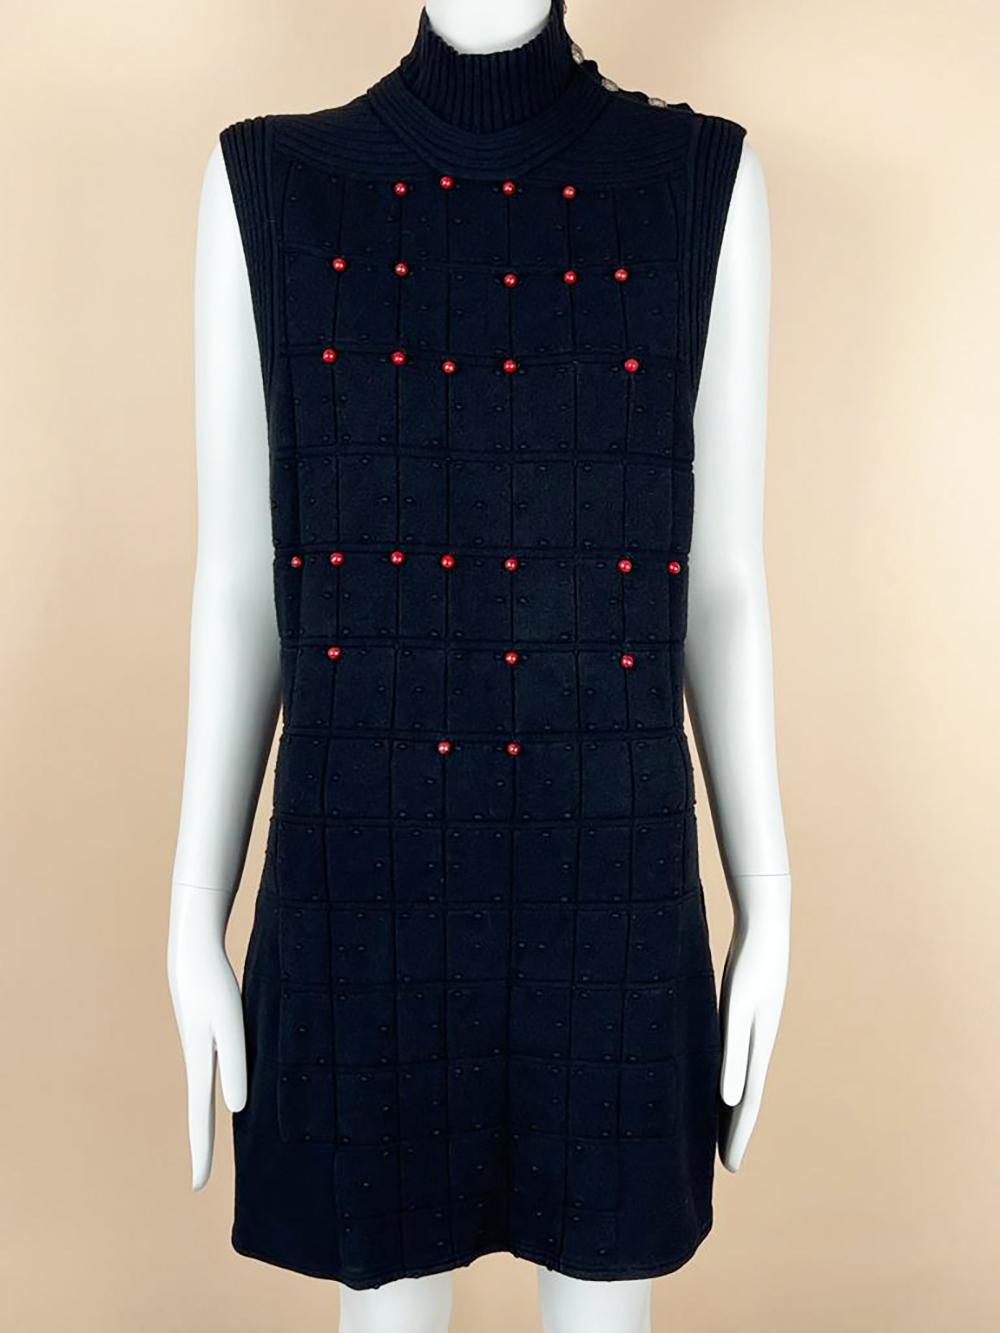 Chanel Shanghai CC Buttons Little Black Dress In Excellent Condition For Sale In Dubai, AE